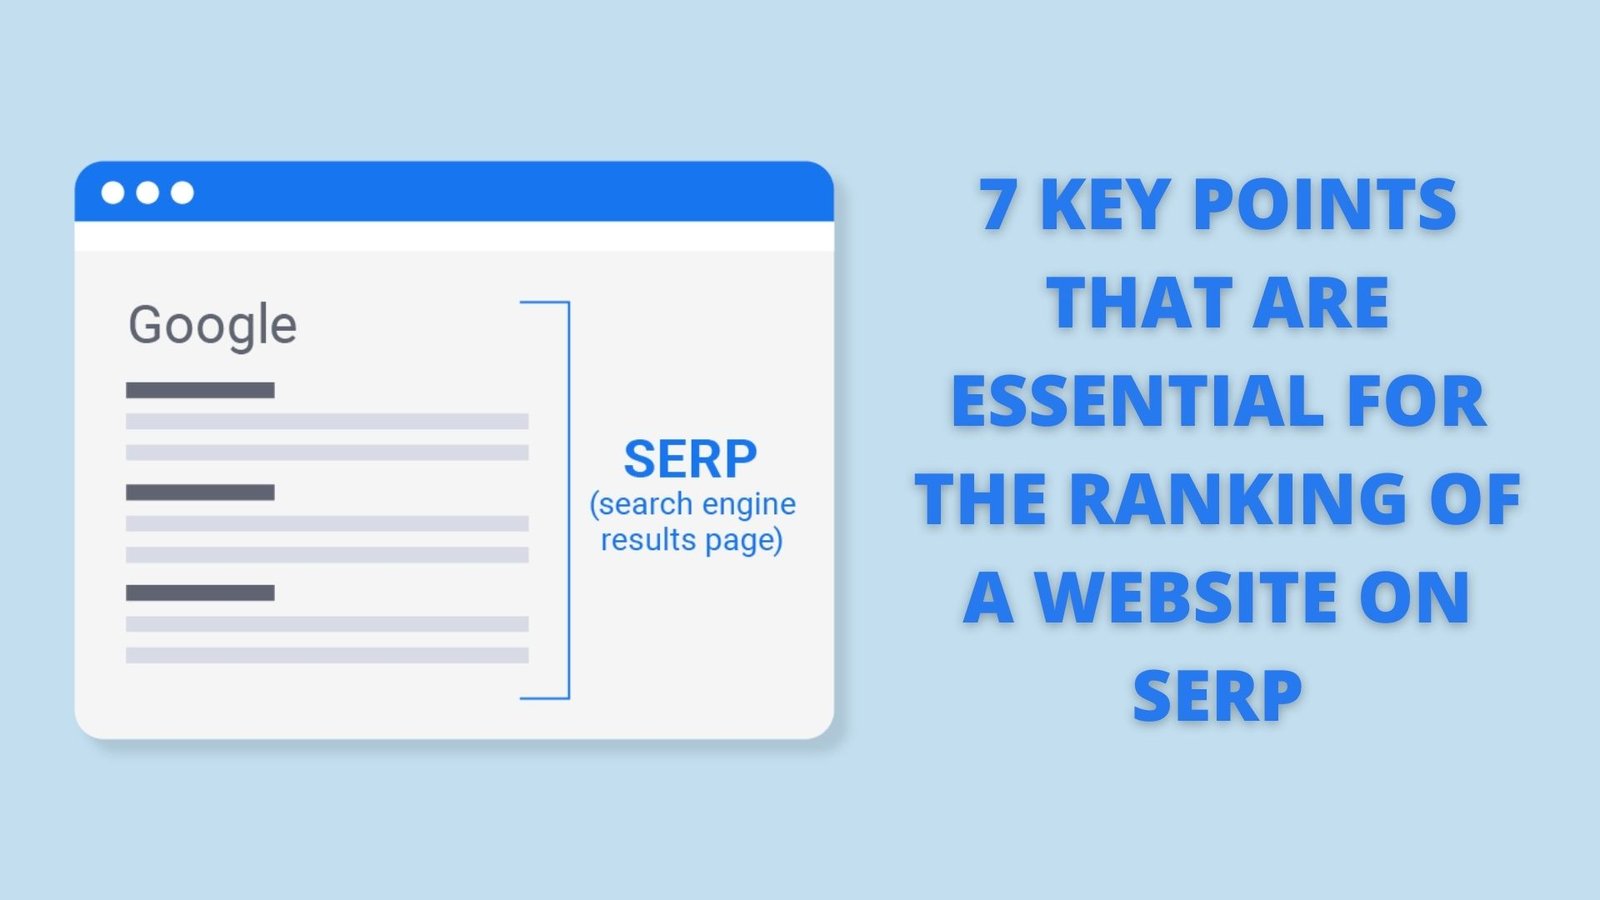 7 Key Points That Are Essential For The Ranking Of A Website On SERP